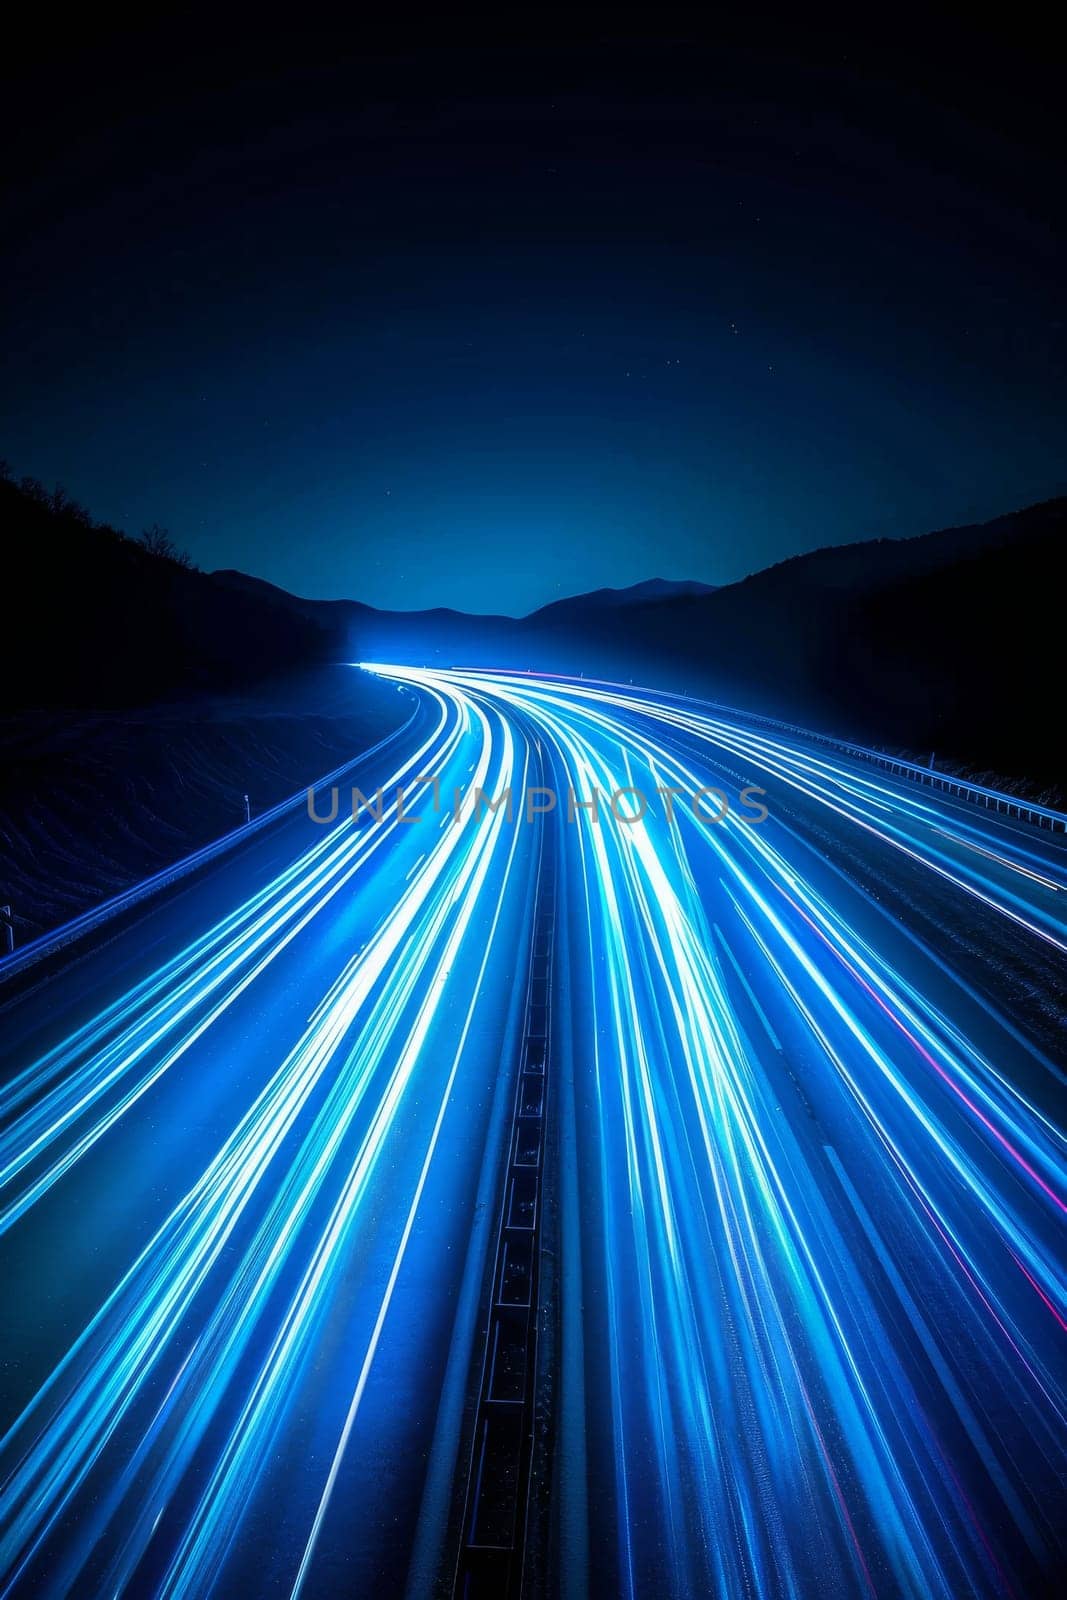 A long blue highway with a bright blue sky in the background. The sky is filled with stars and the highway is filled with streaks of light. Concept of motion and energy